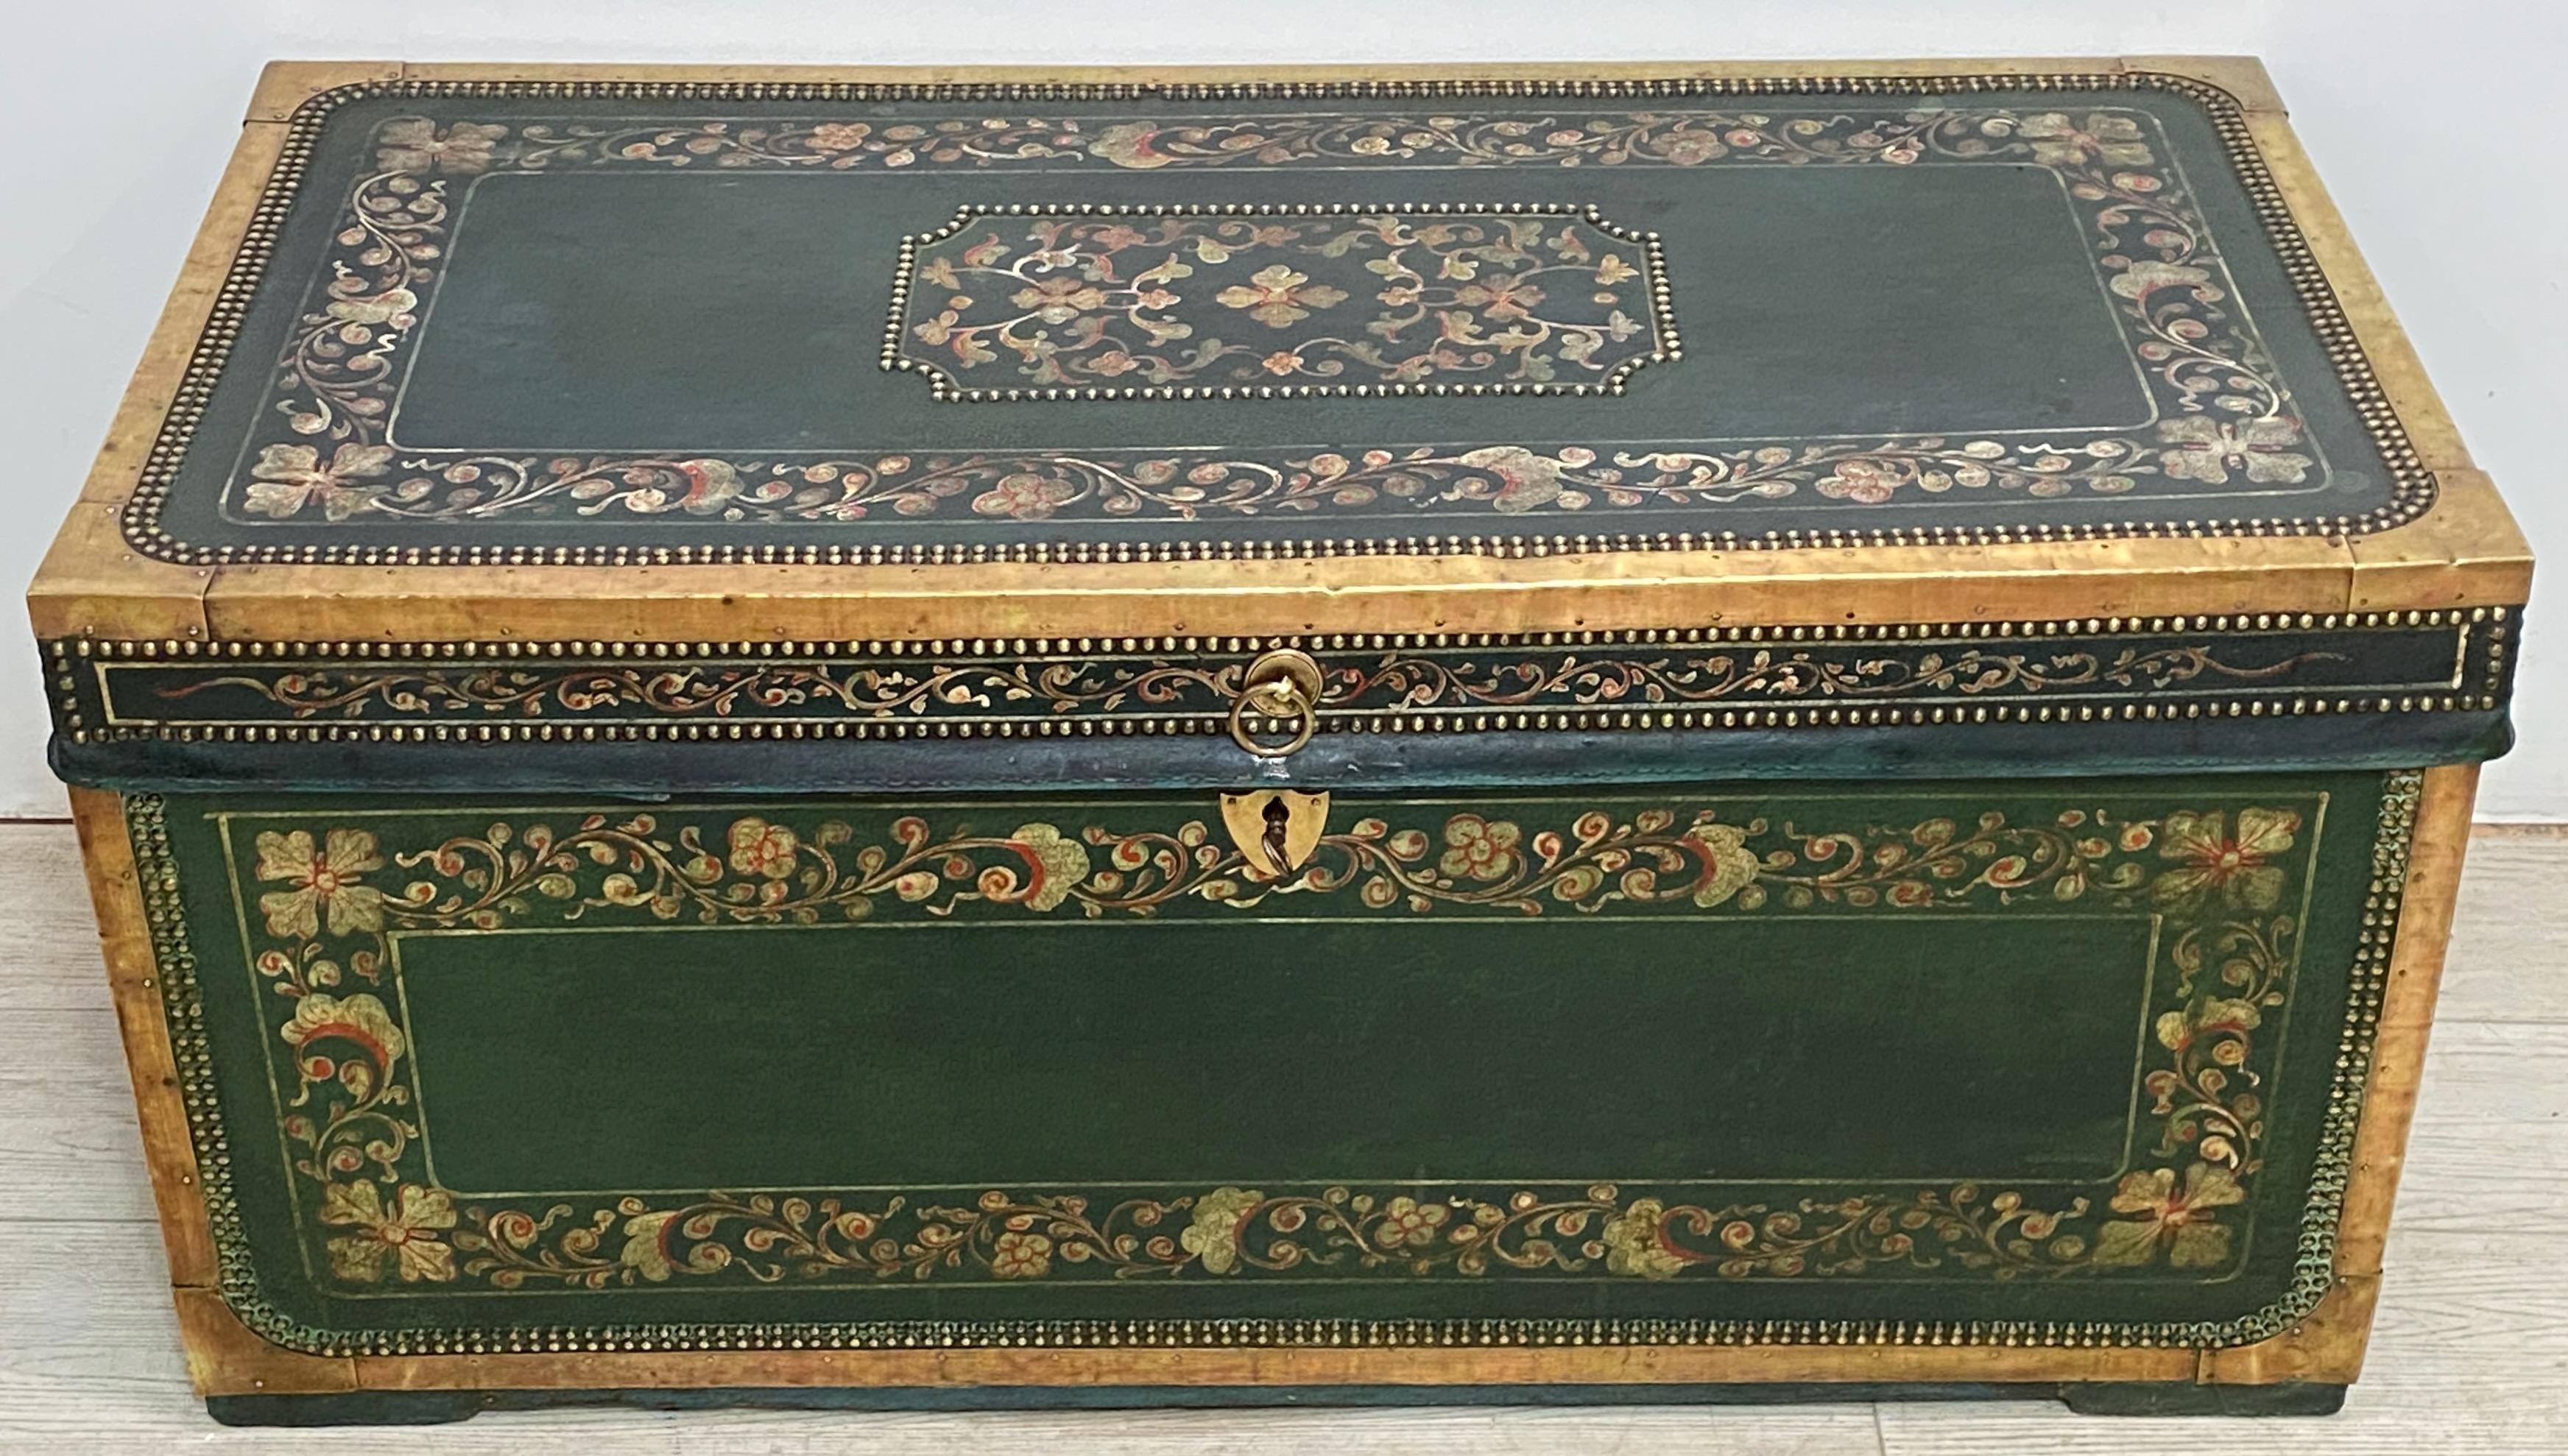 An exceptional and difficult to find green leather camphor wood trunk with hand painted floral decoration and brass detail.
Makes for an interesting and useful coffee table.
All original and recently refreshed. 
In excellent antique condition.